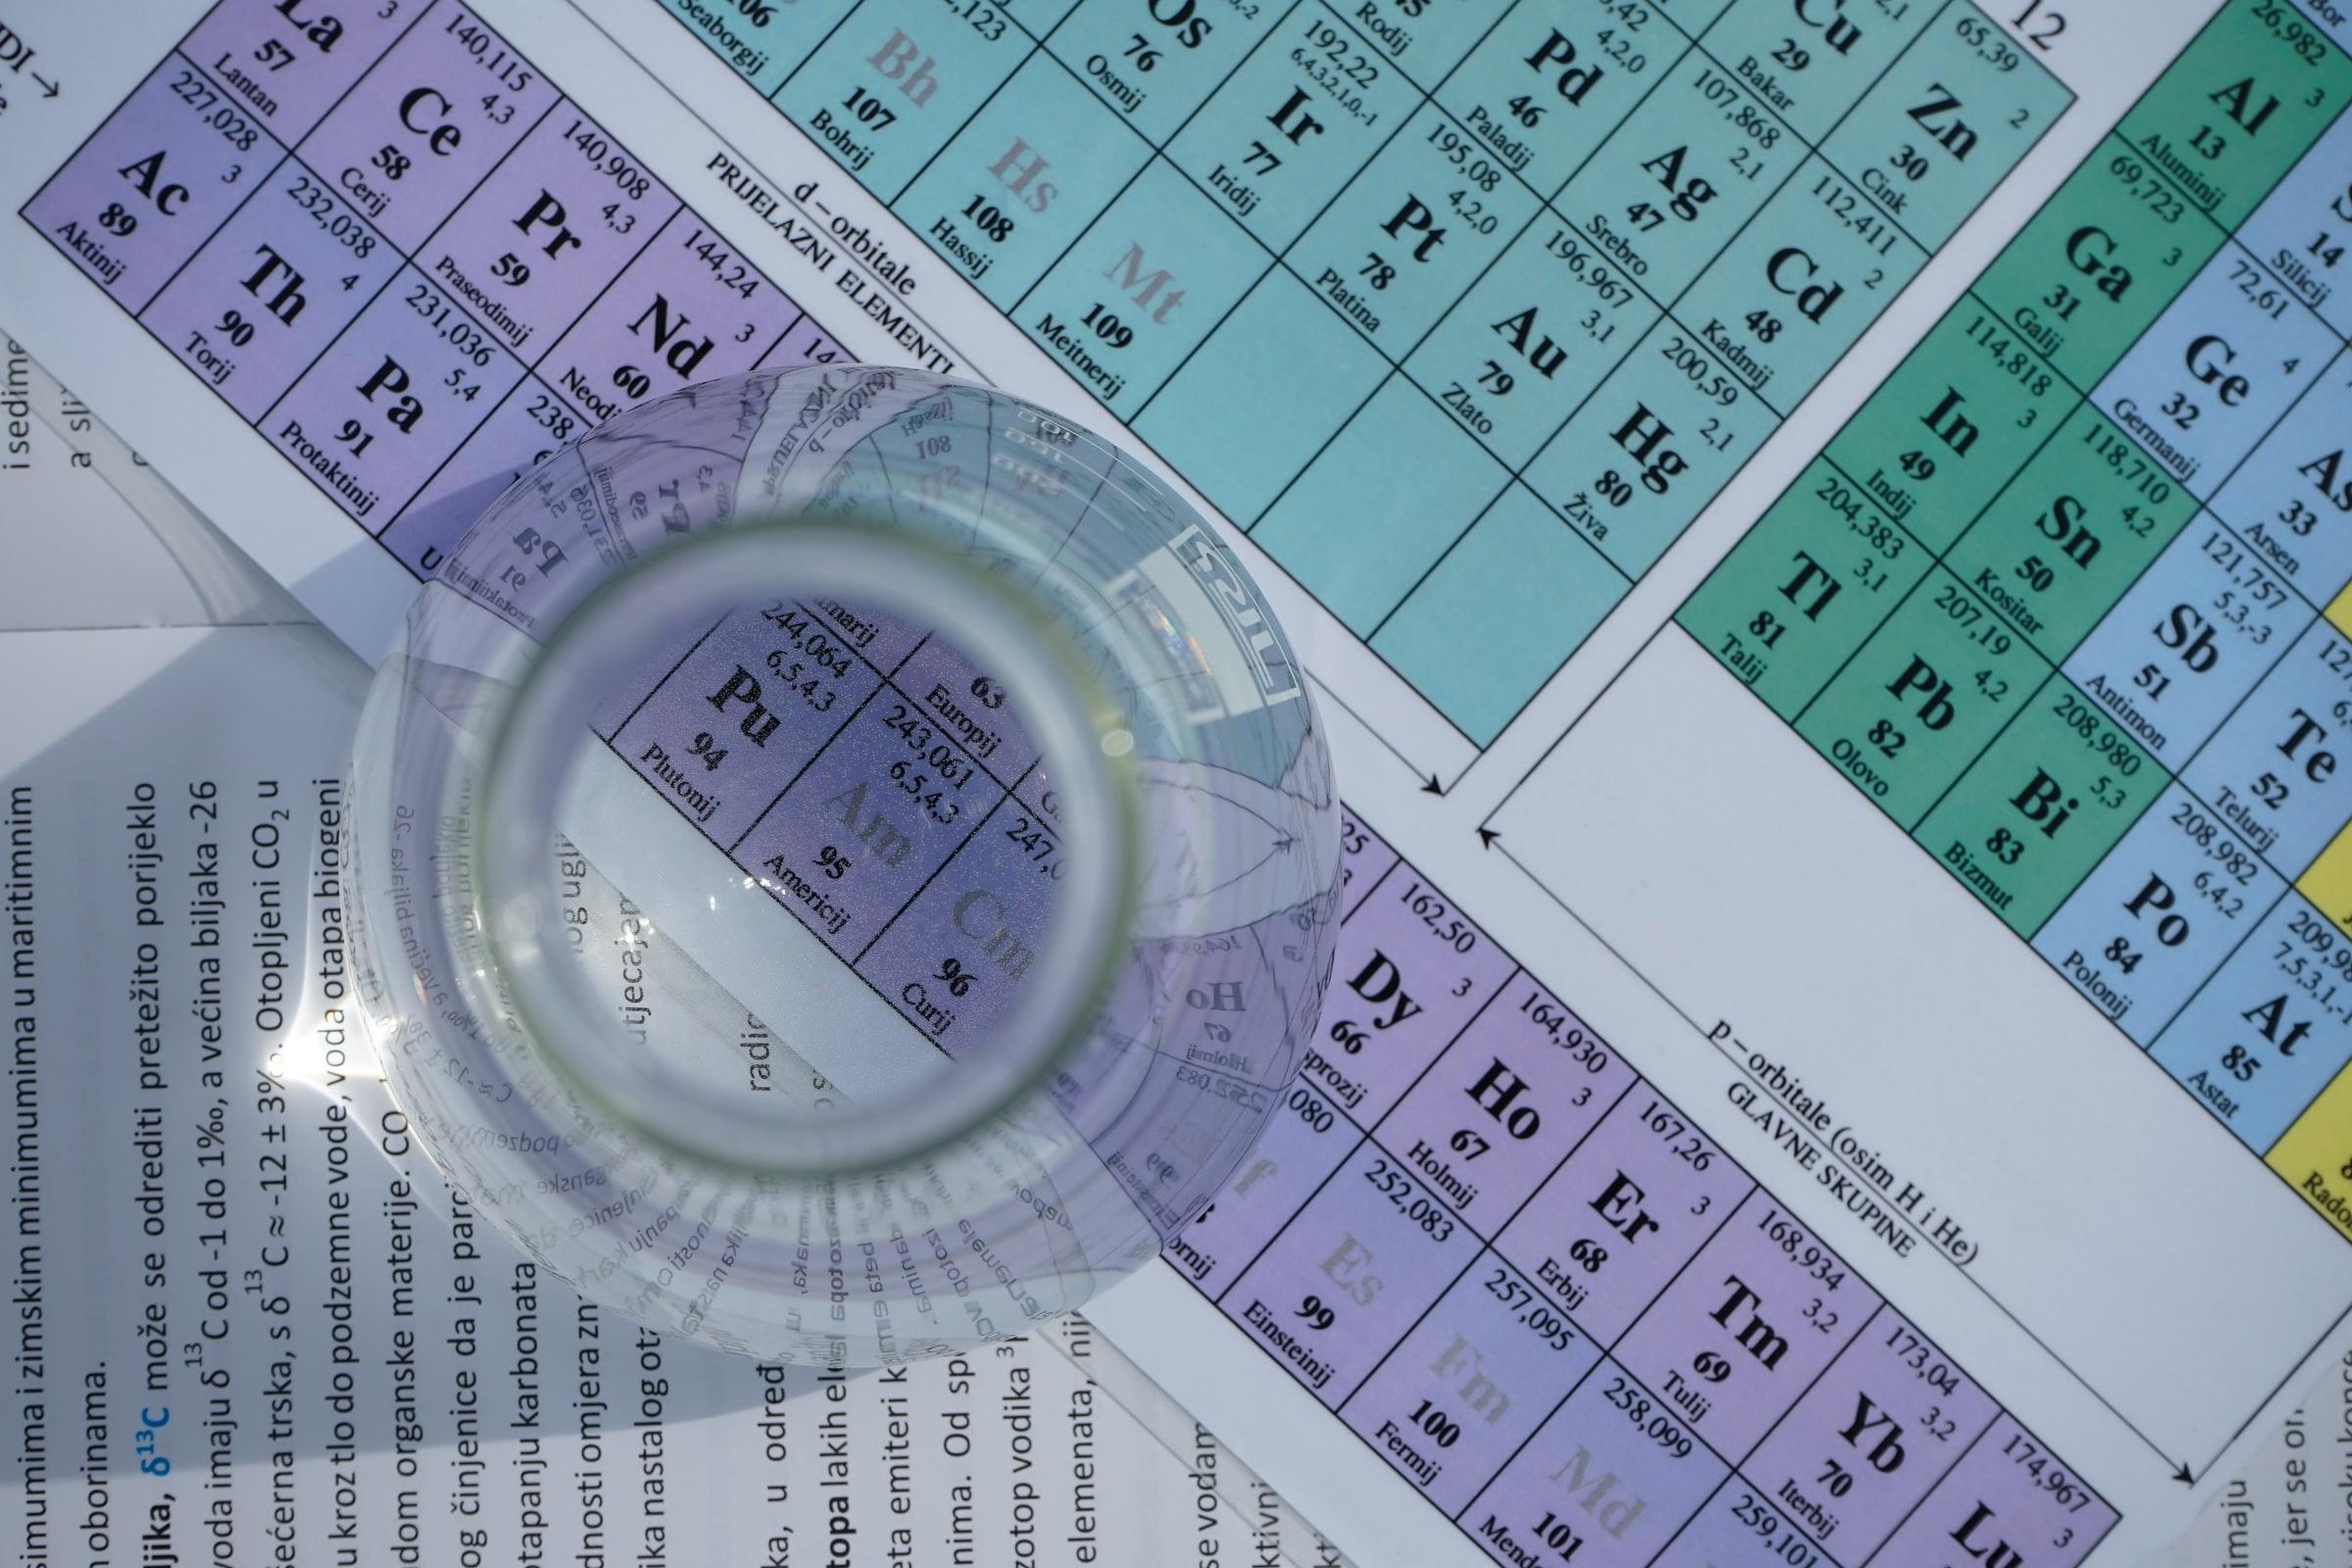 Find out who Invented the Periodic Table by reading through!